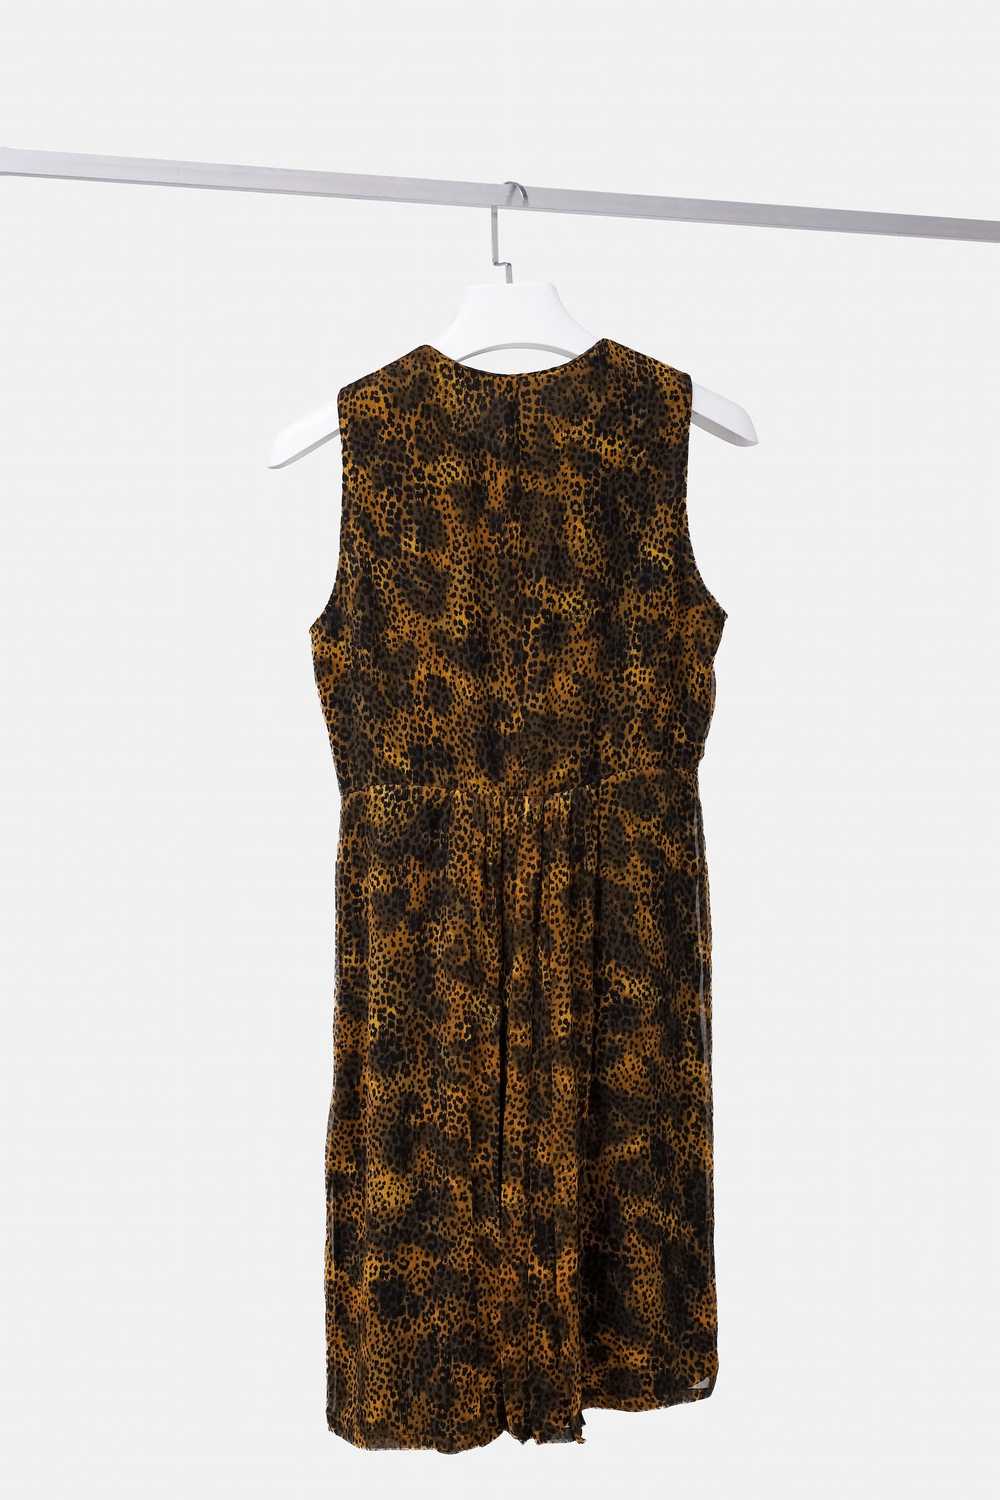 Burberry Burberry Brit Silk Cheetah Print Fit and… - image 2